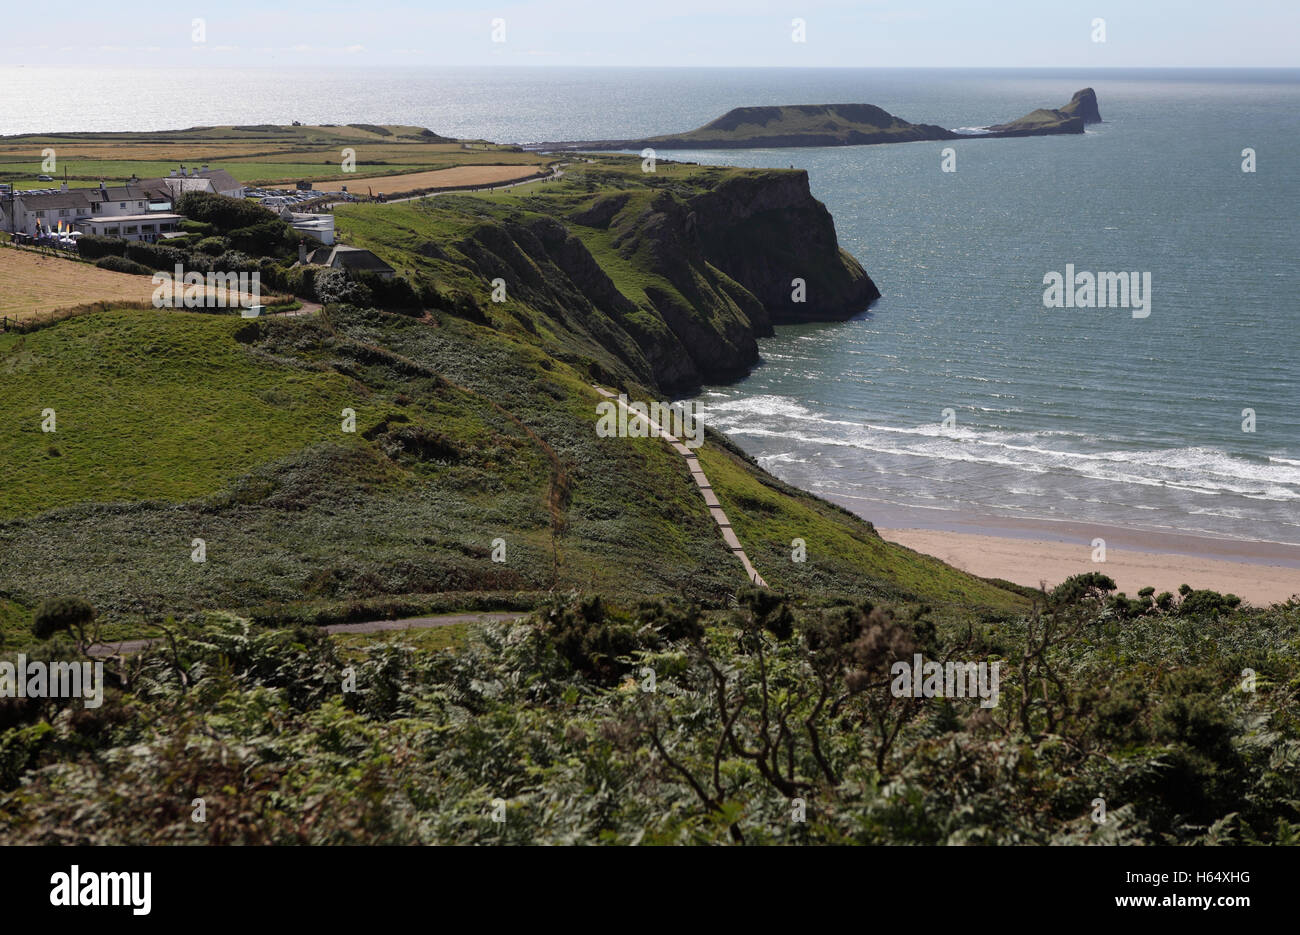 A view of Rhossili Village, the steep cliffs over Rhossili Bay, Worm's Head rock and the Celtic Sea as seen from Cefn Bryn. Stock Photo